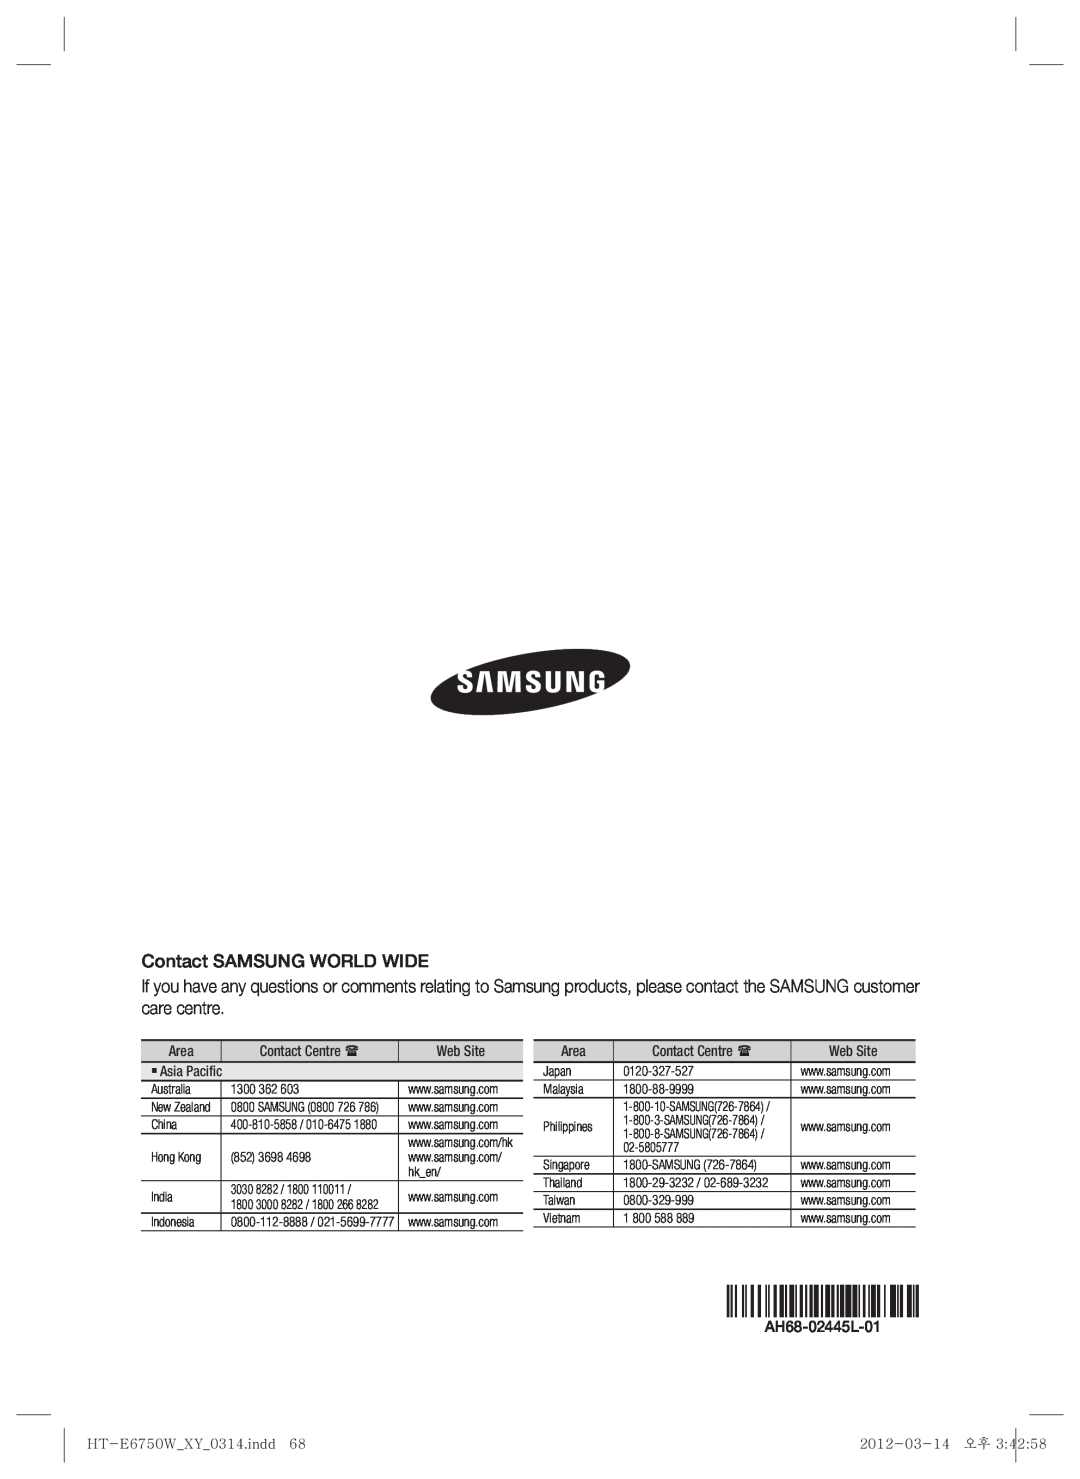 Samsung HT-E6750W user manual Contact SAMSUNG WORLD WIDE, Area, Contact Centre , Web Site, `Asia Pacific, AH68-02445L-01 